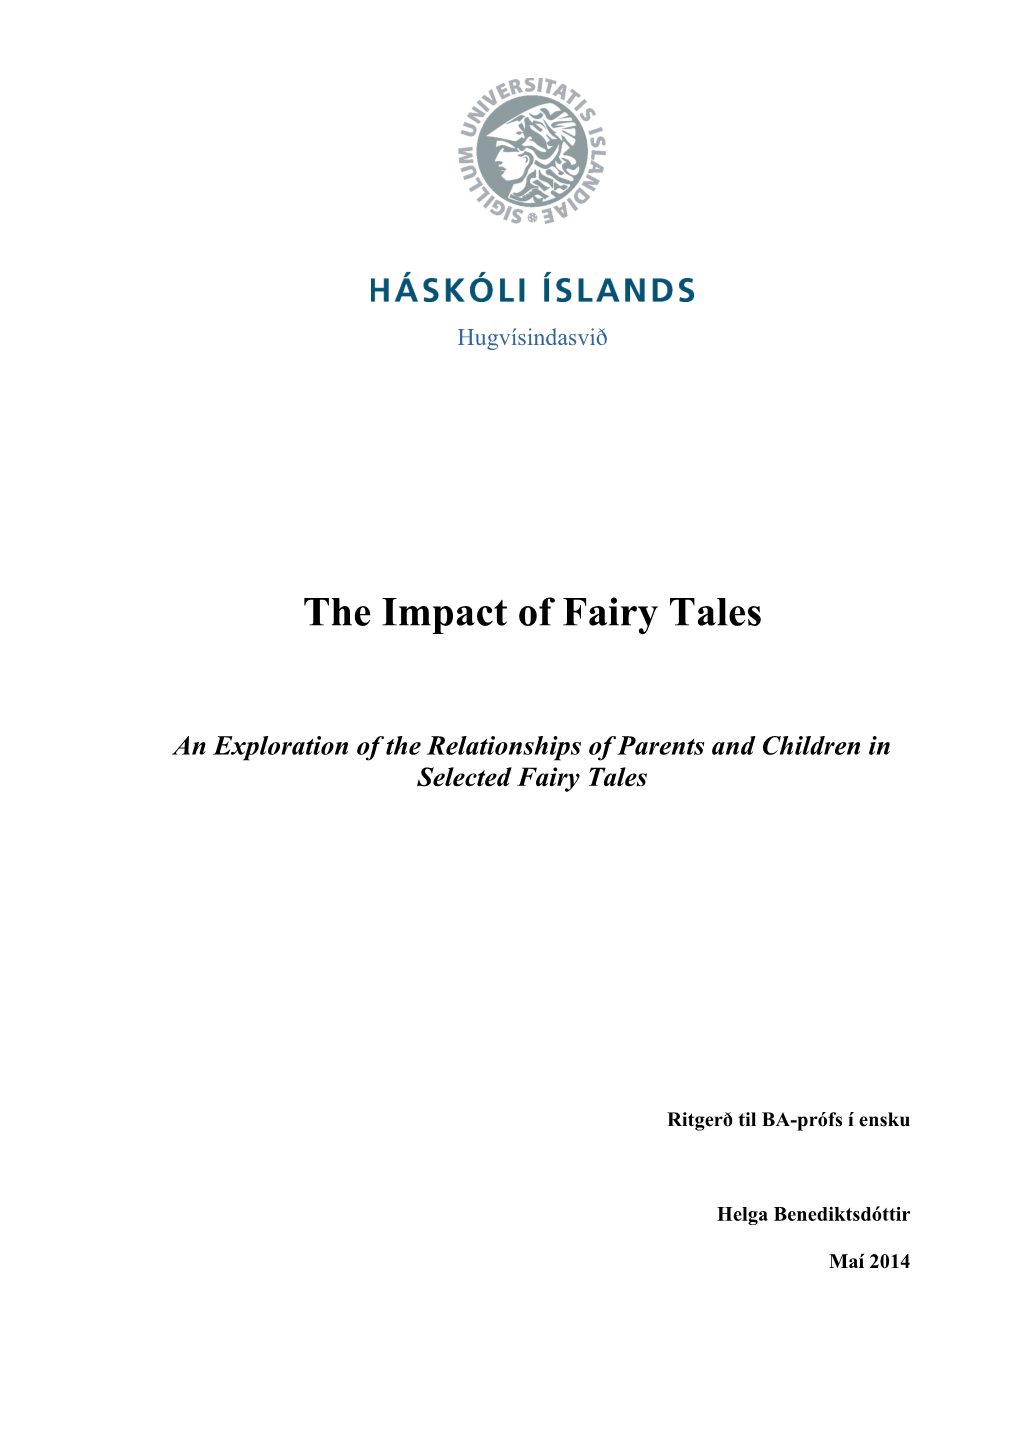 The Impact of Fairy Tales